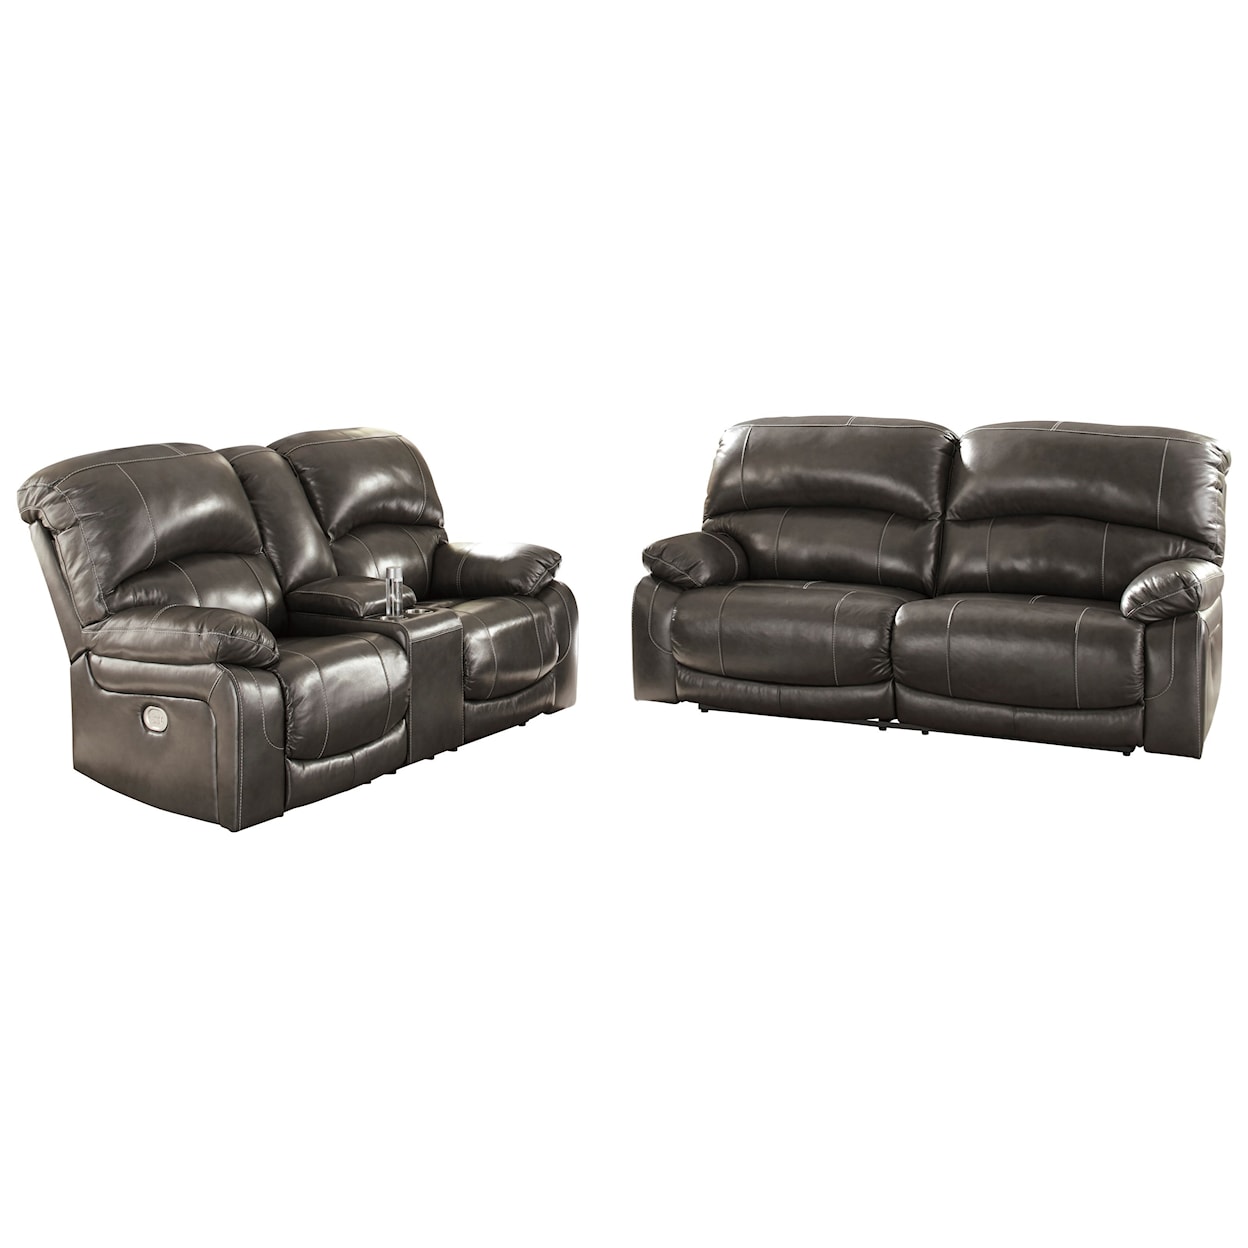 Signature Design by Ashley Furniture Hallstrung Power Reclining Living Room Group